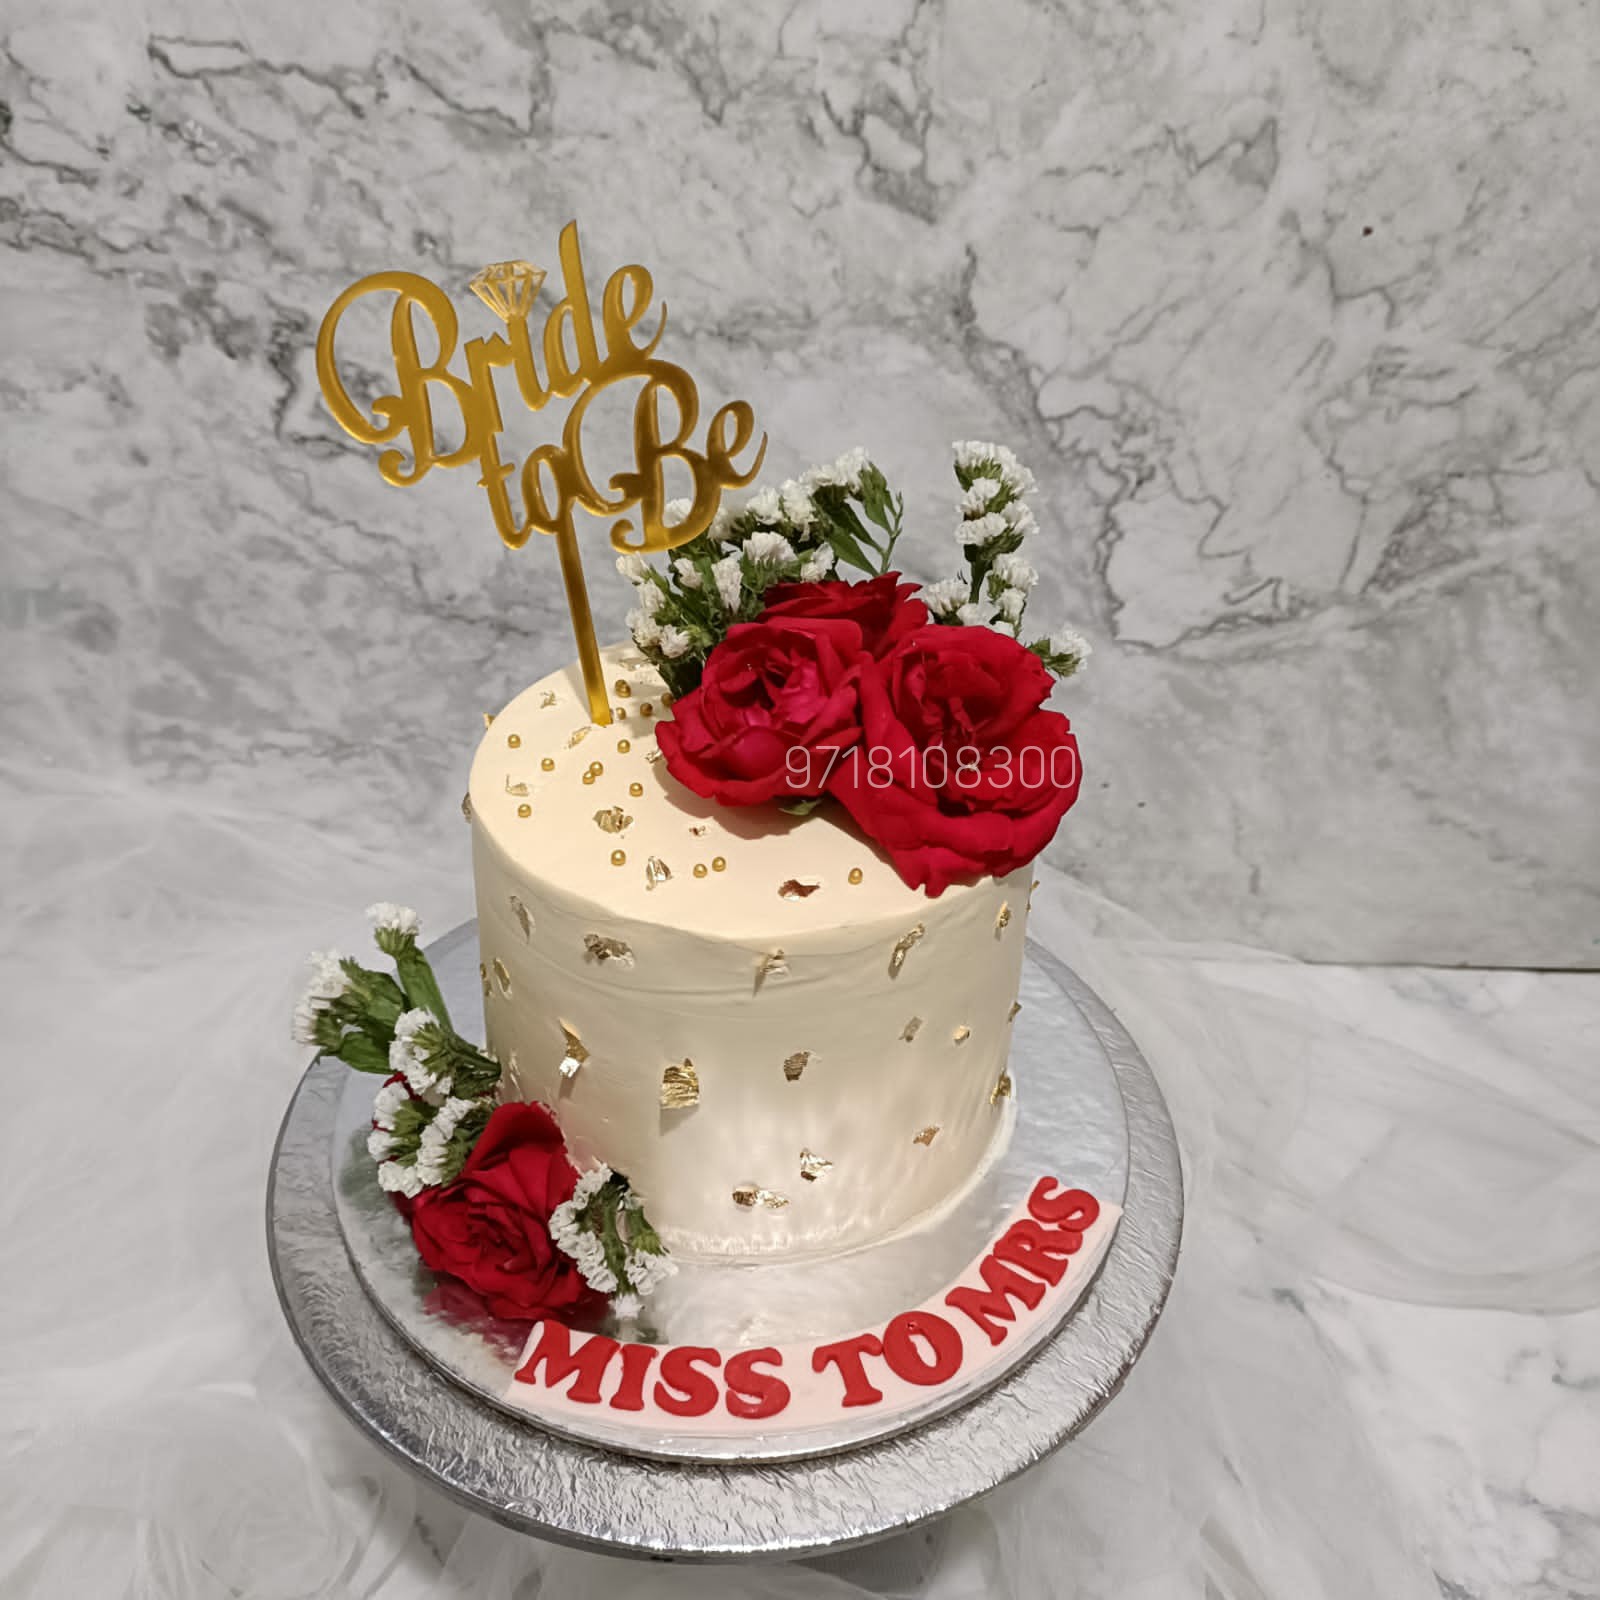 Floral Cake  Cake Shop in Chennai or Puducherry  Hot Breads